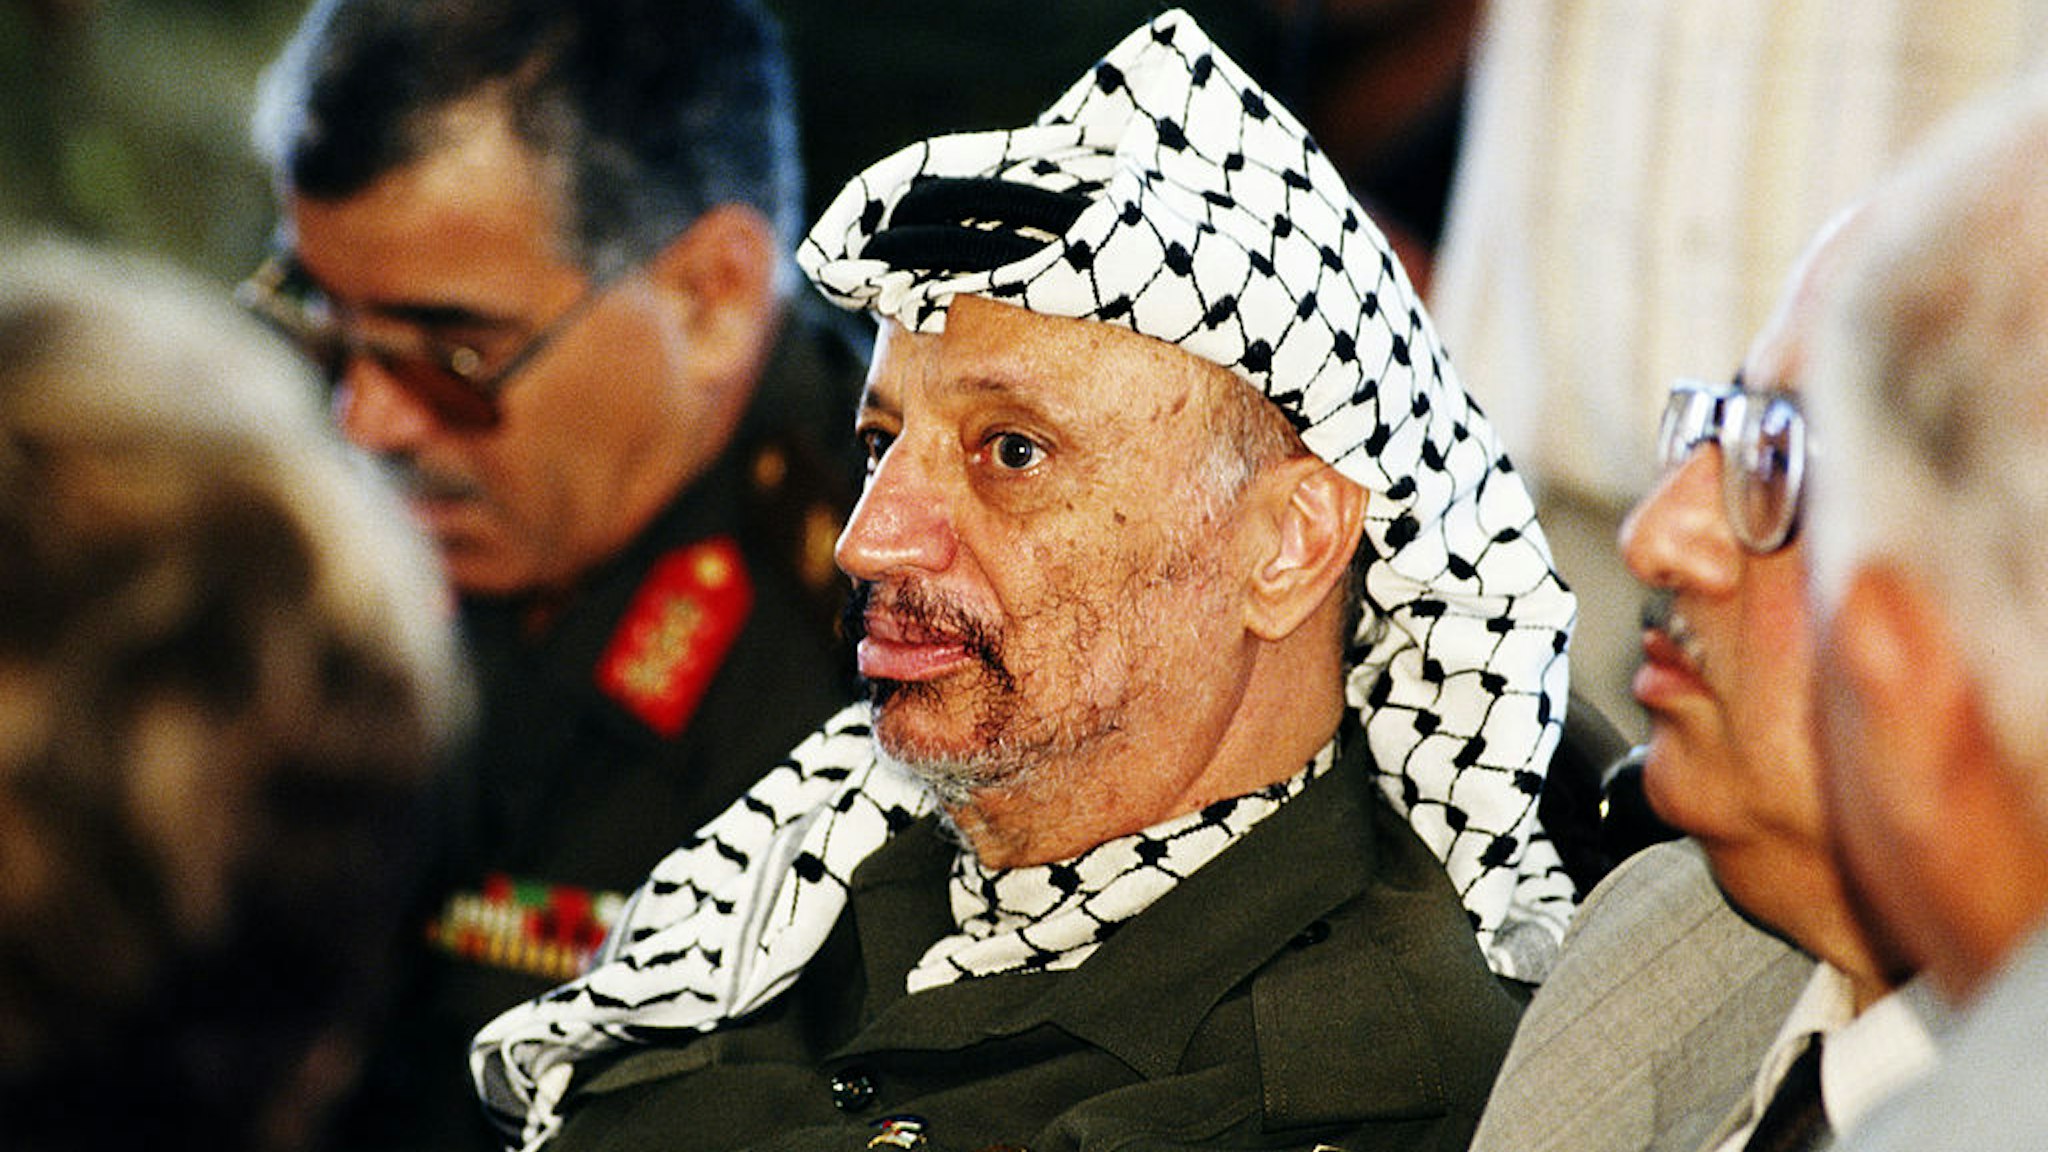 GAZA, ISRAEL - JULY 1994: Chairman Yasser Arafat pictured during a meeting after his return from exile to Gaza.